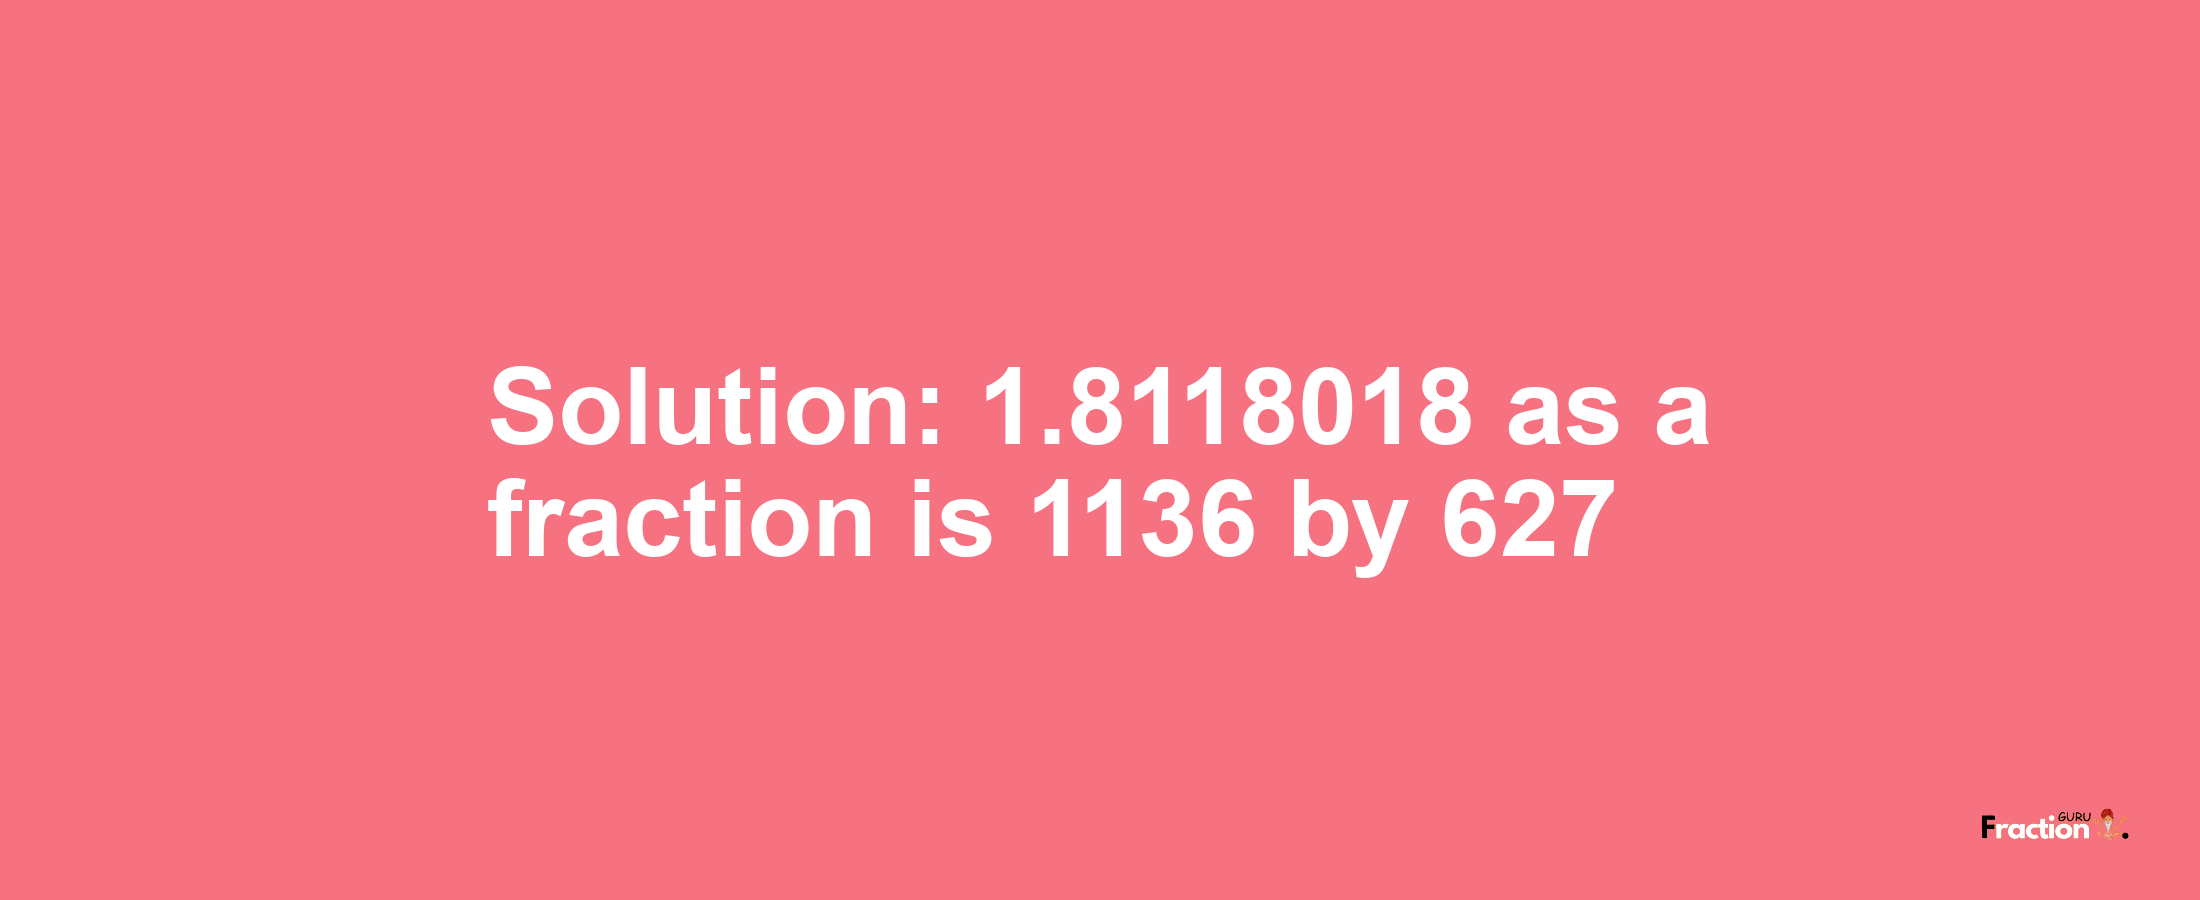 Solution:1.8118018 as a fraction is 1136/627